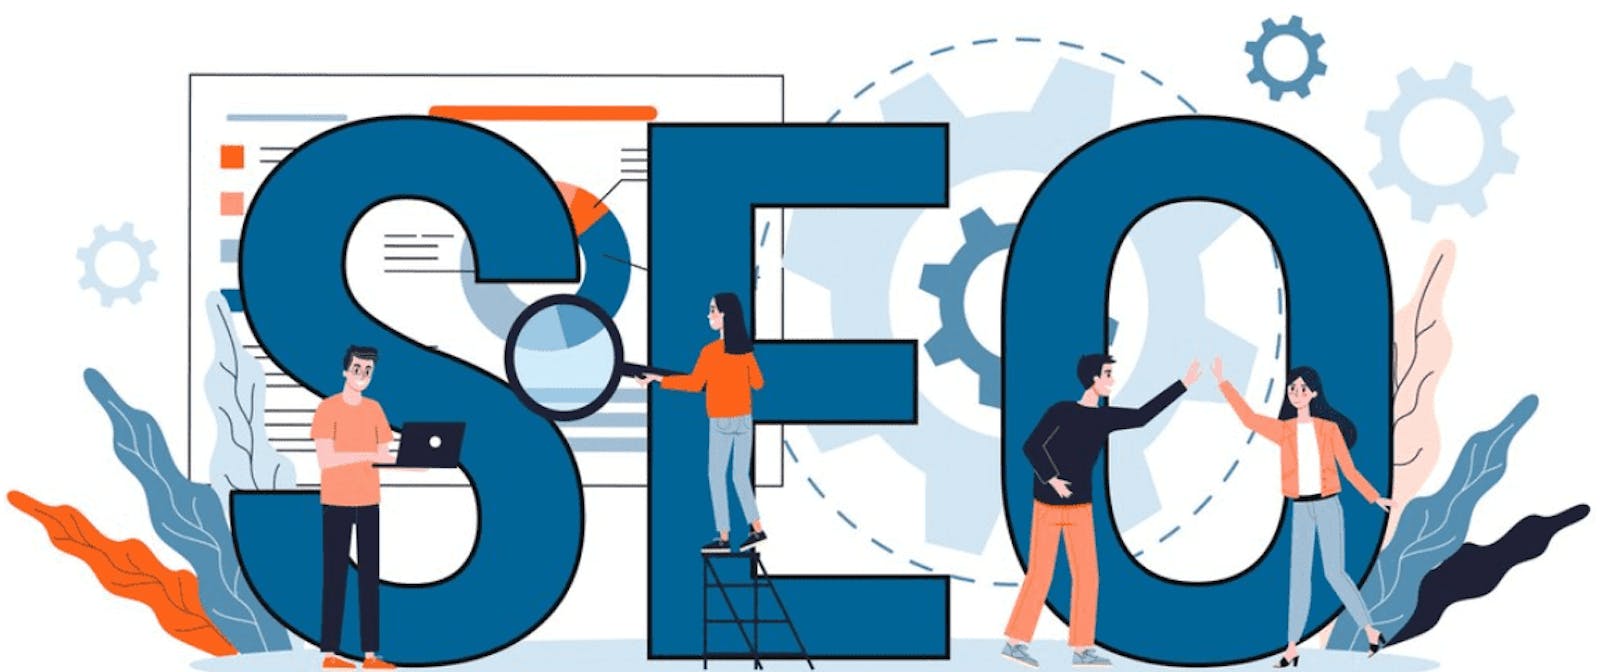 Maximize Your Online Presence with Professional Search Engine Optimization (SEO) Services - Increase Traffic and Boost Rankings Today